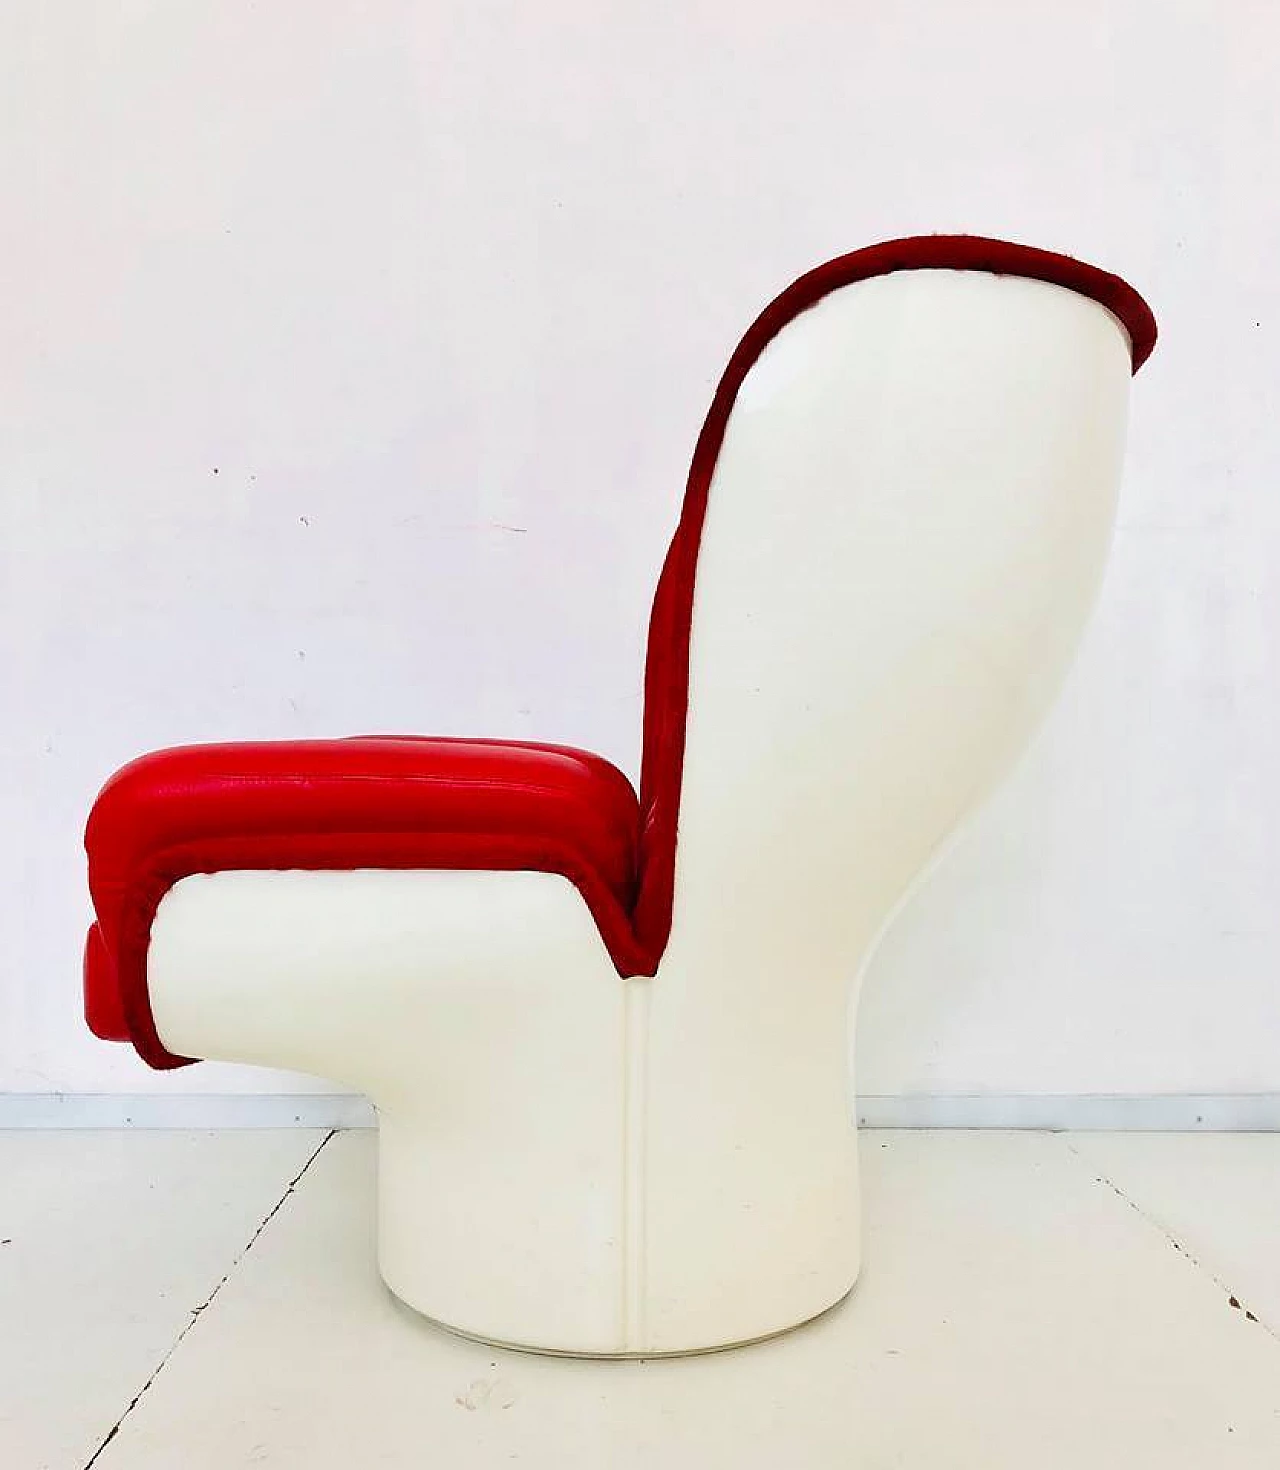 Armchair "Elda chair" by Joe Colombo for Confort '60s 12